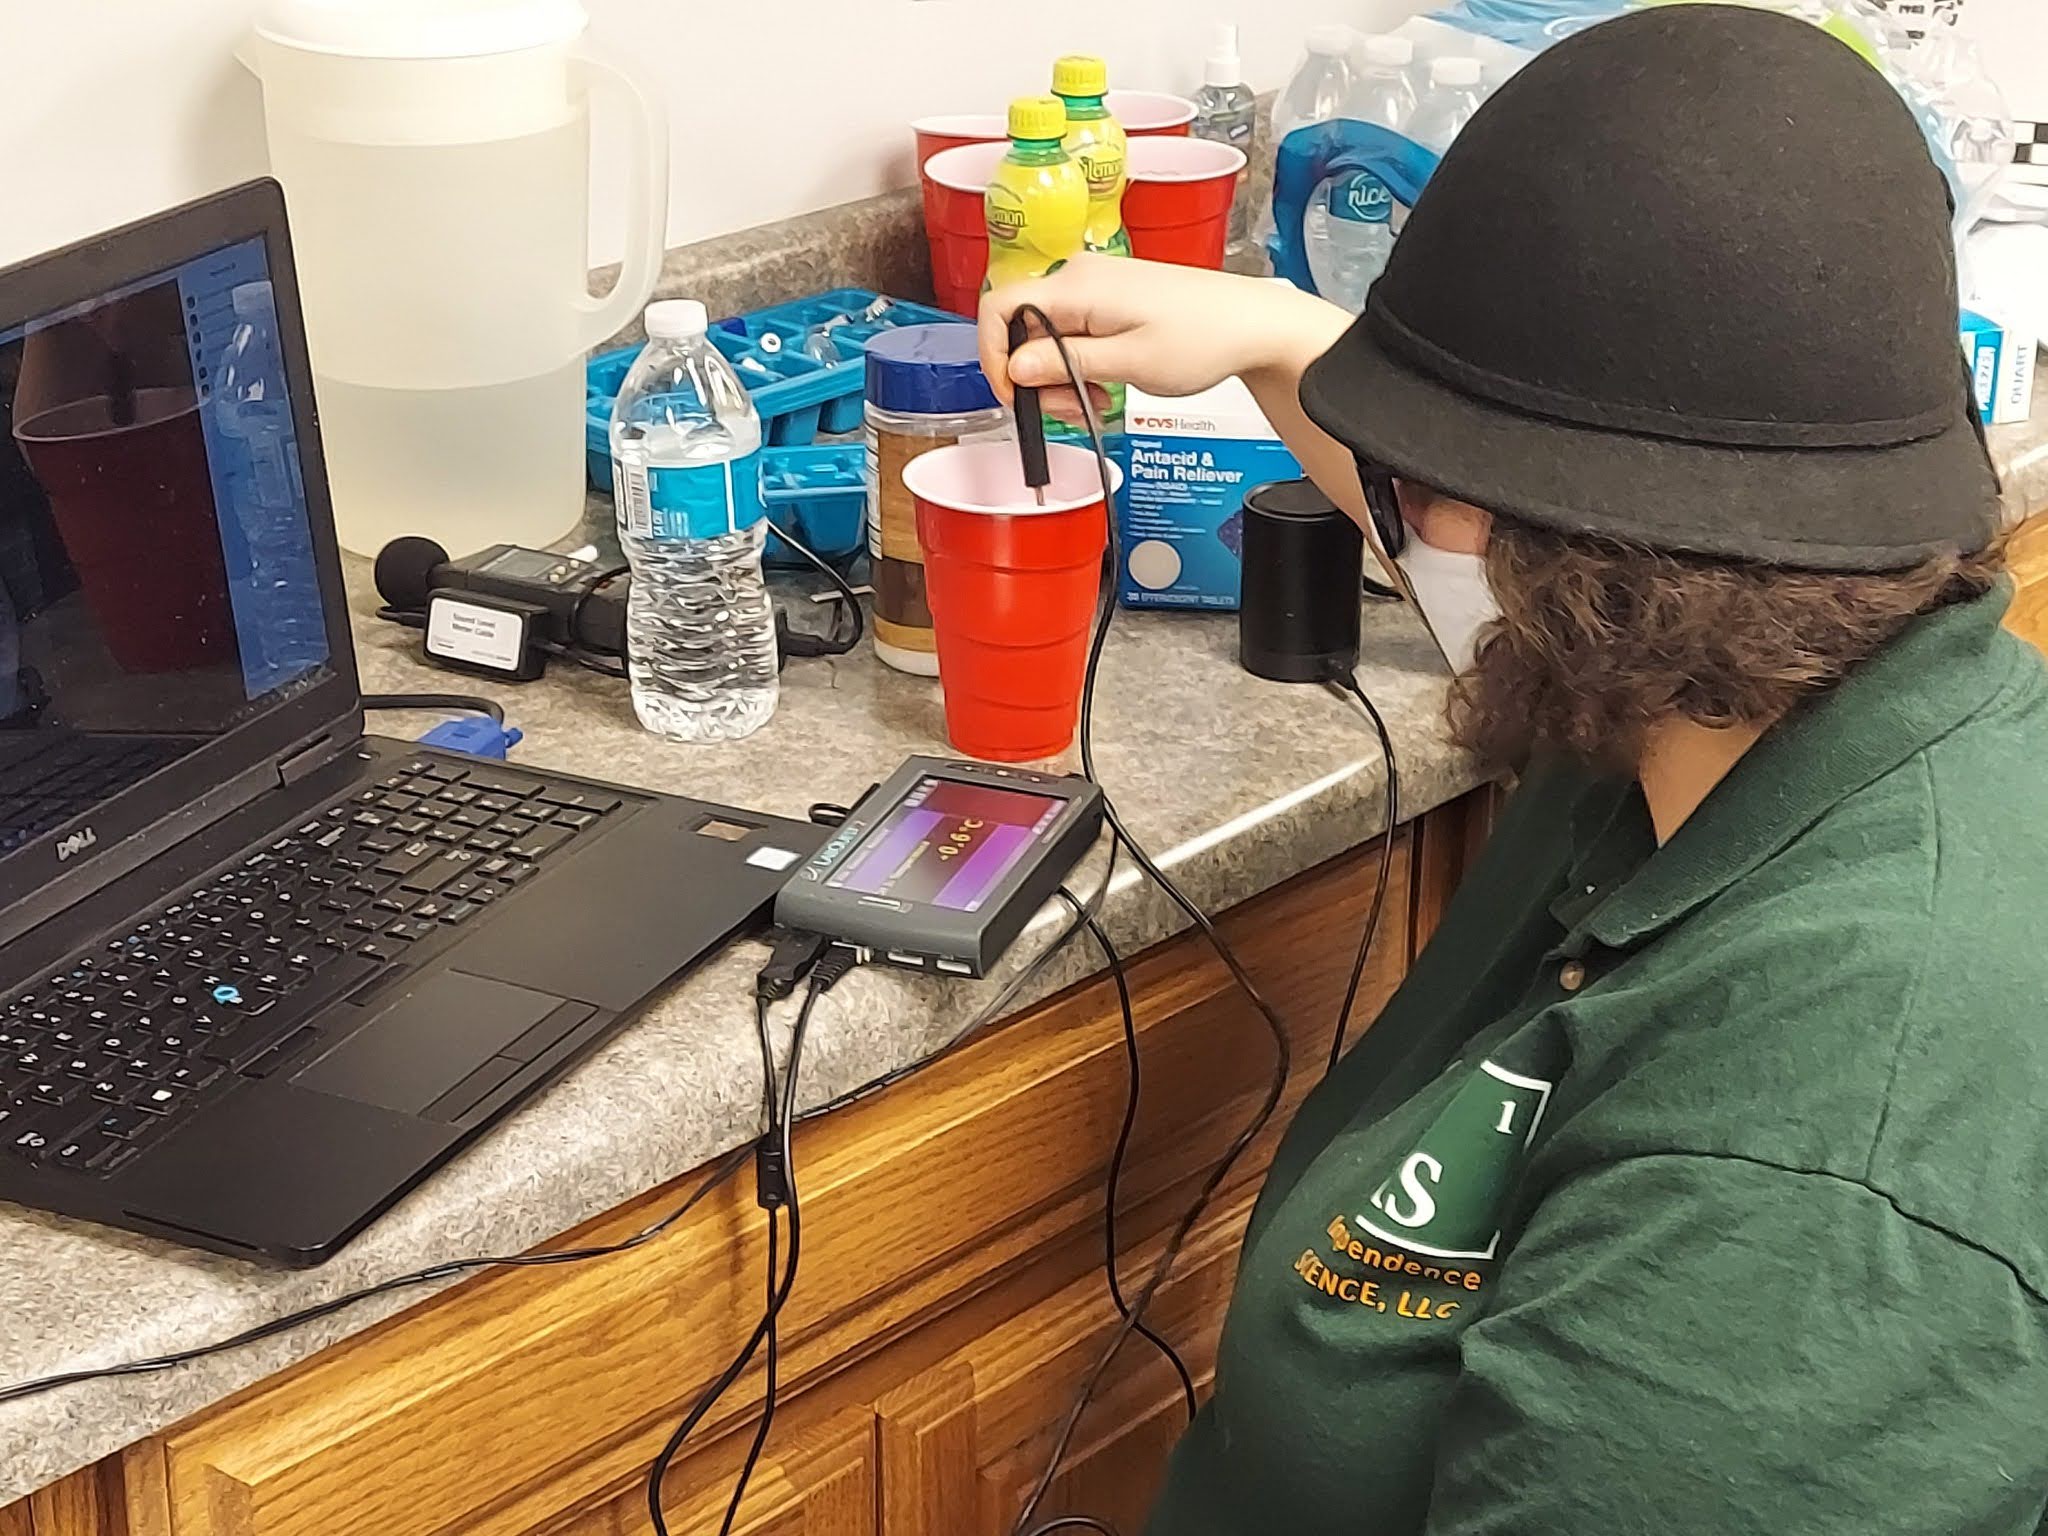 Ashley stirs a cup of salted ice water with a temperature probe and the Talking LabQuest for a virtual demo wearing a matching Independence Science shirt and face mask